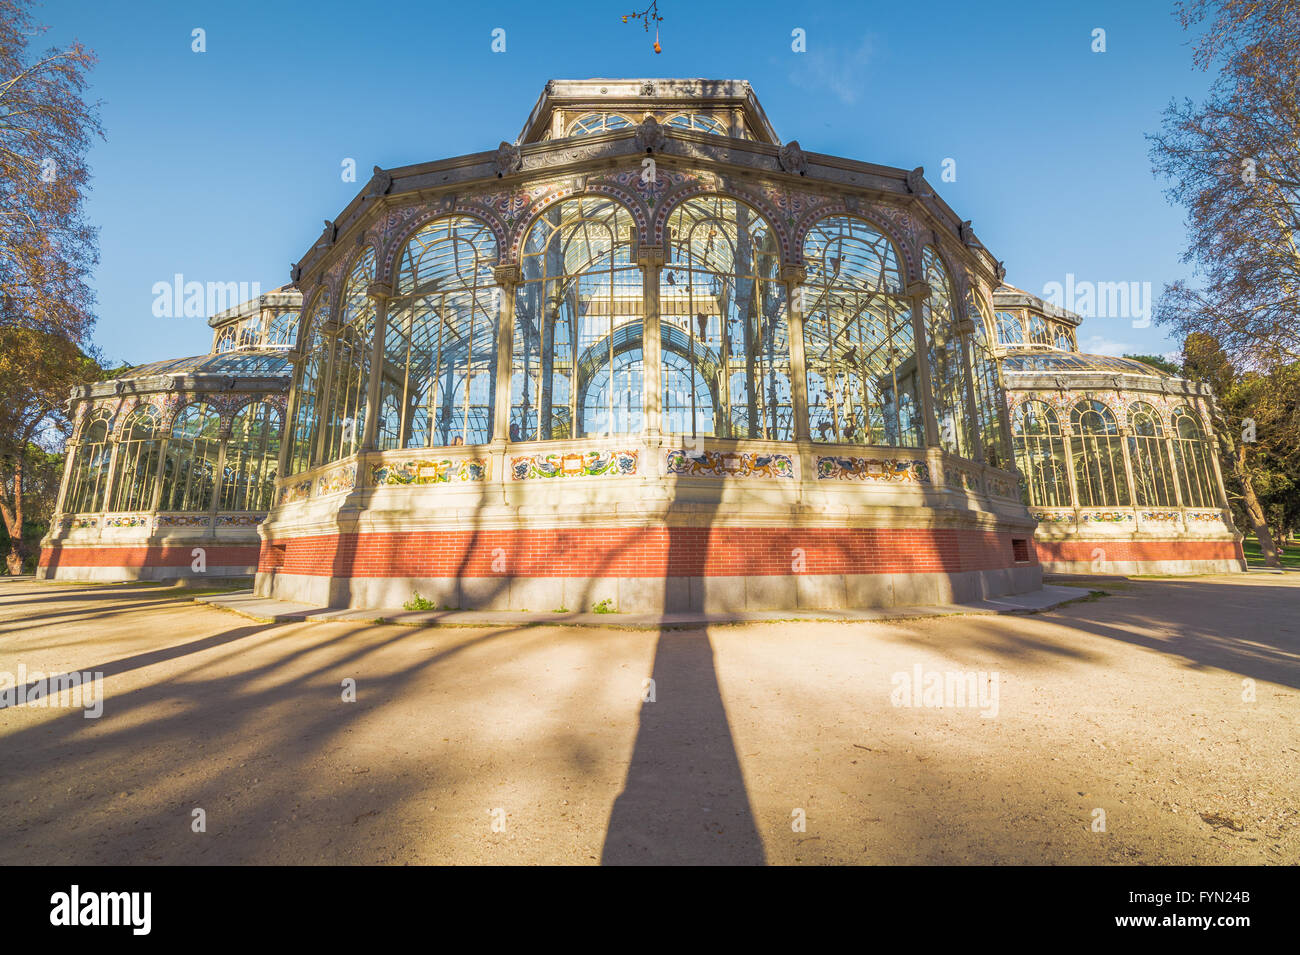 The Crystal Palace (Palacio de Cristal) is located in the Retiro park in Madrid, Spain. It is a metal structure used for exposit Stock Photo